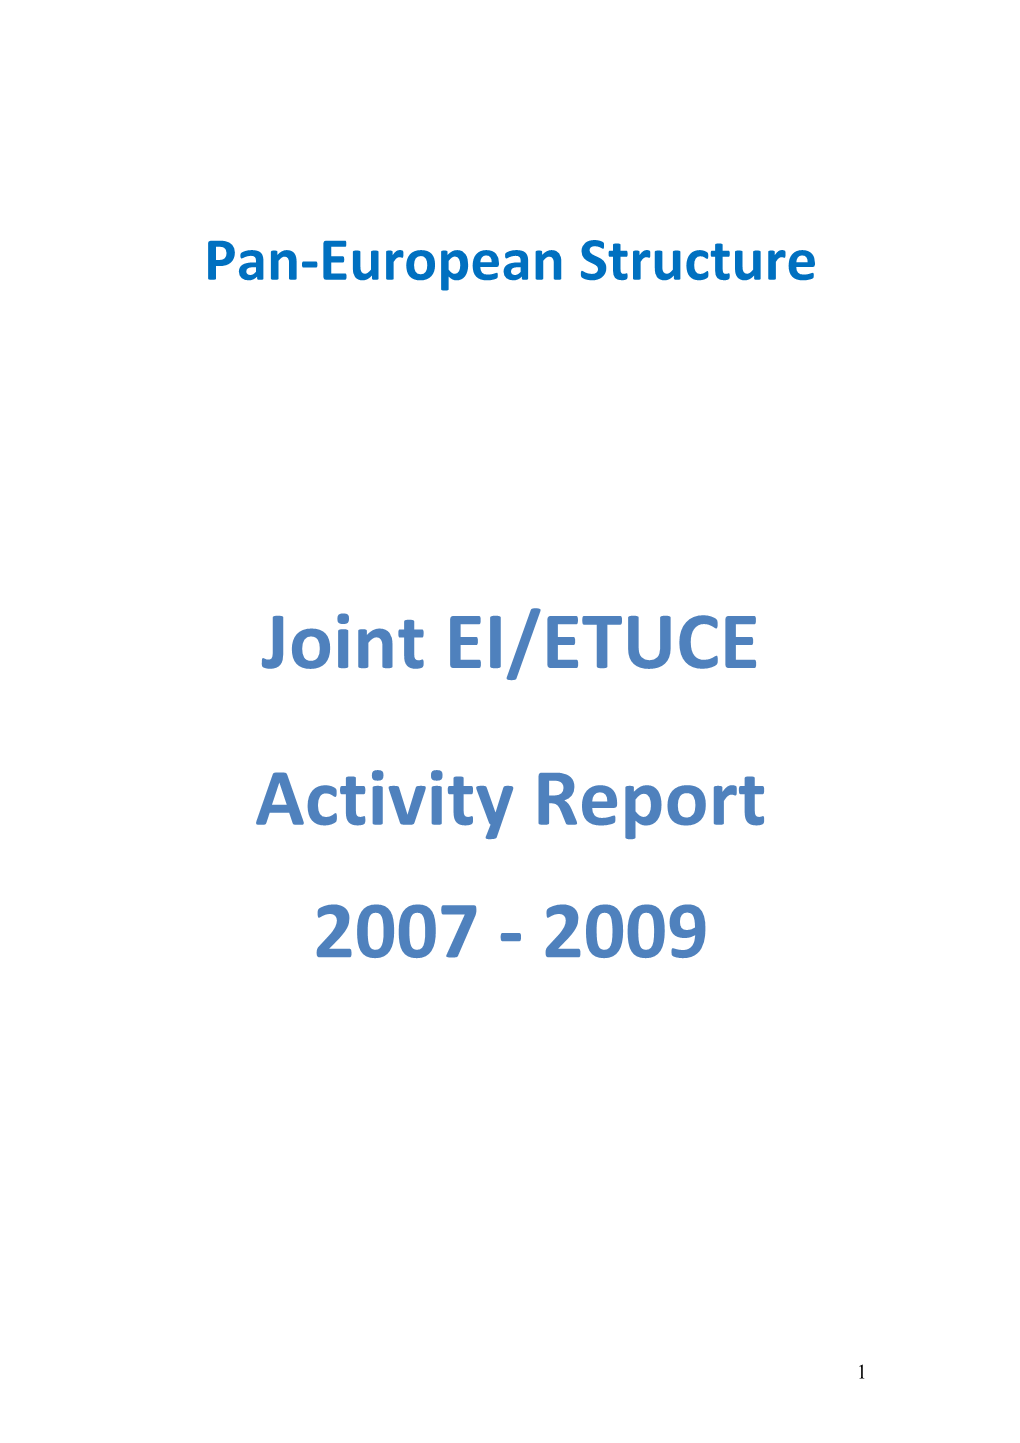 2009 Pan-European Conference - Joint EIE-ETUCE Activity Report